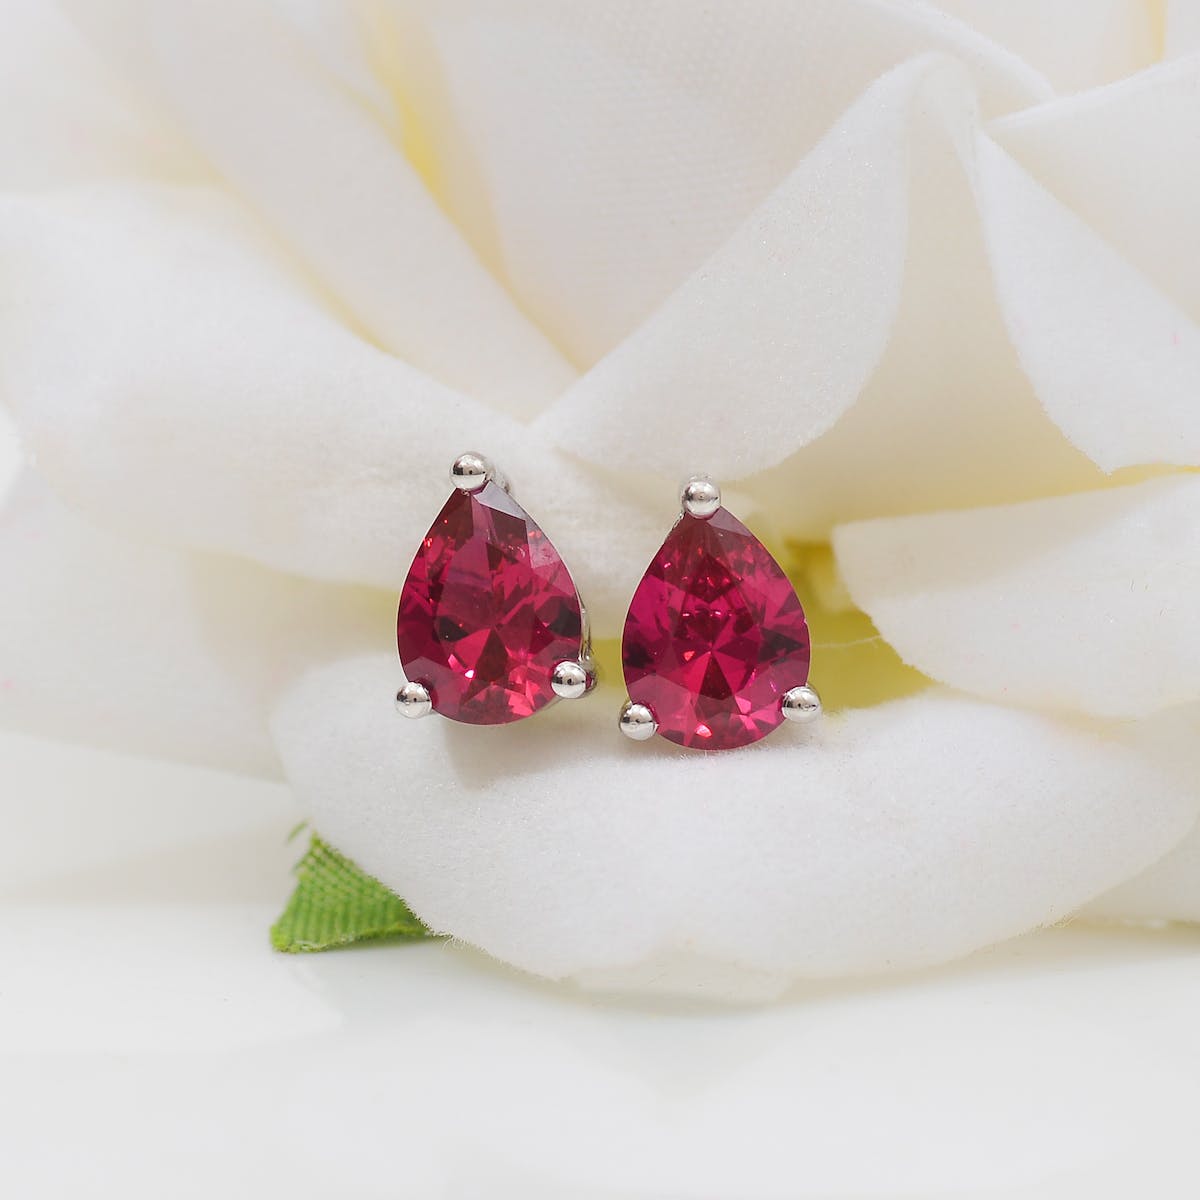 Close up of Earrings with Rubies